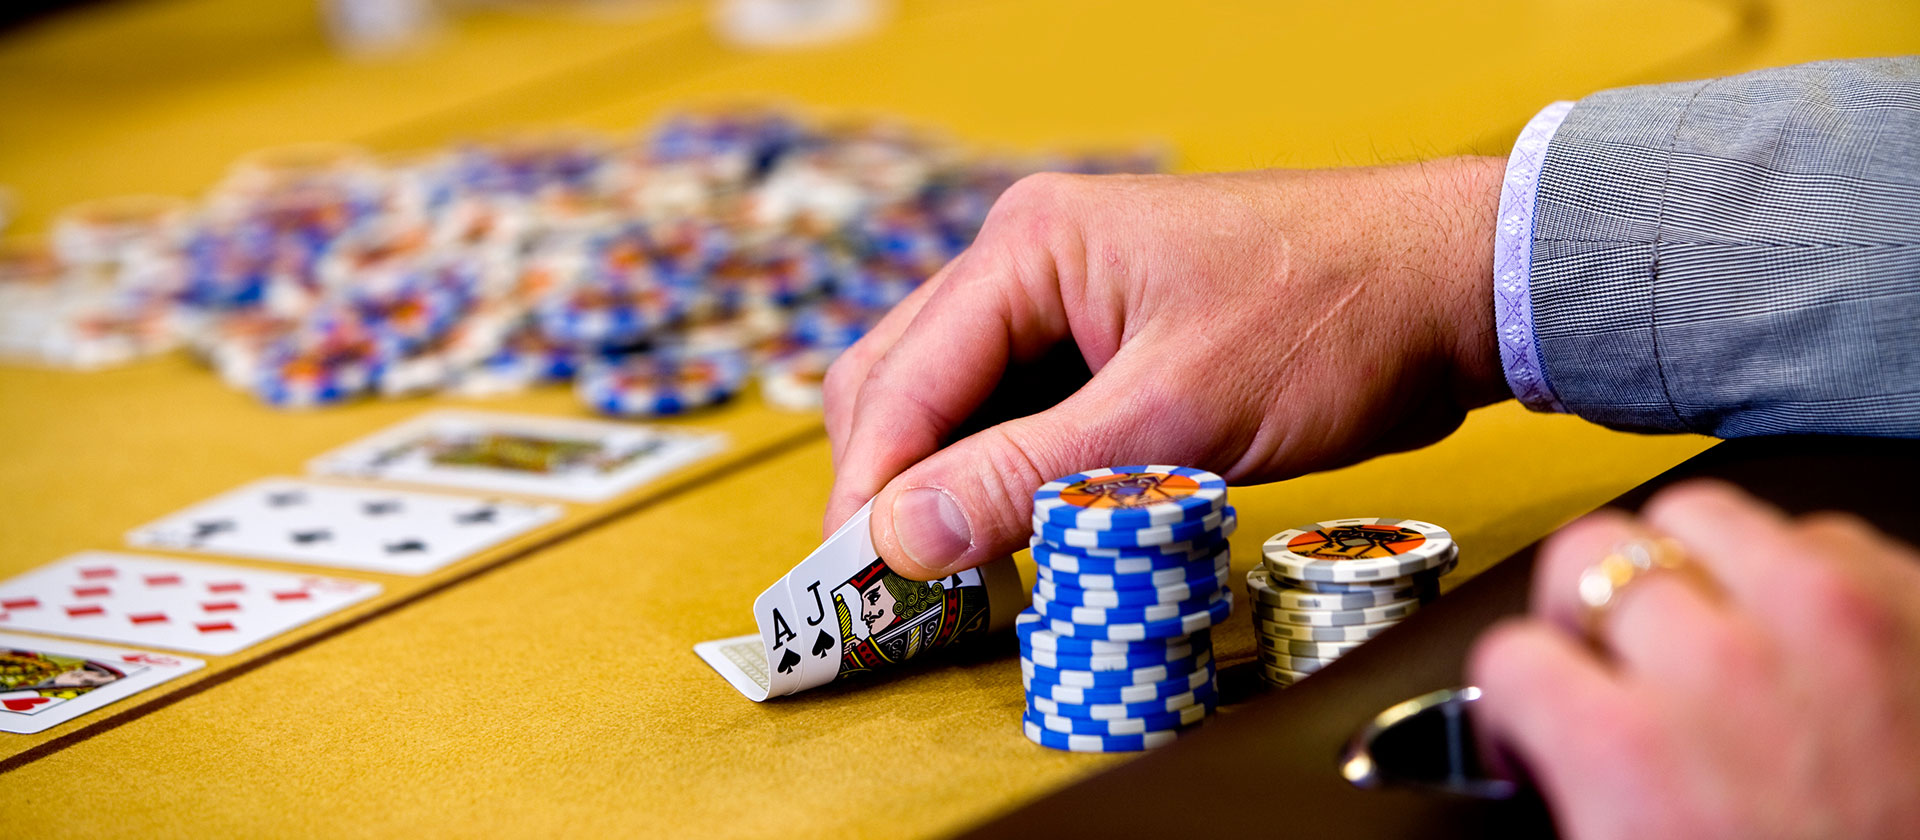 Play online casino games with ease